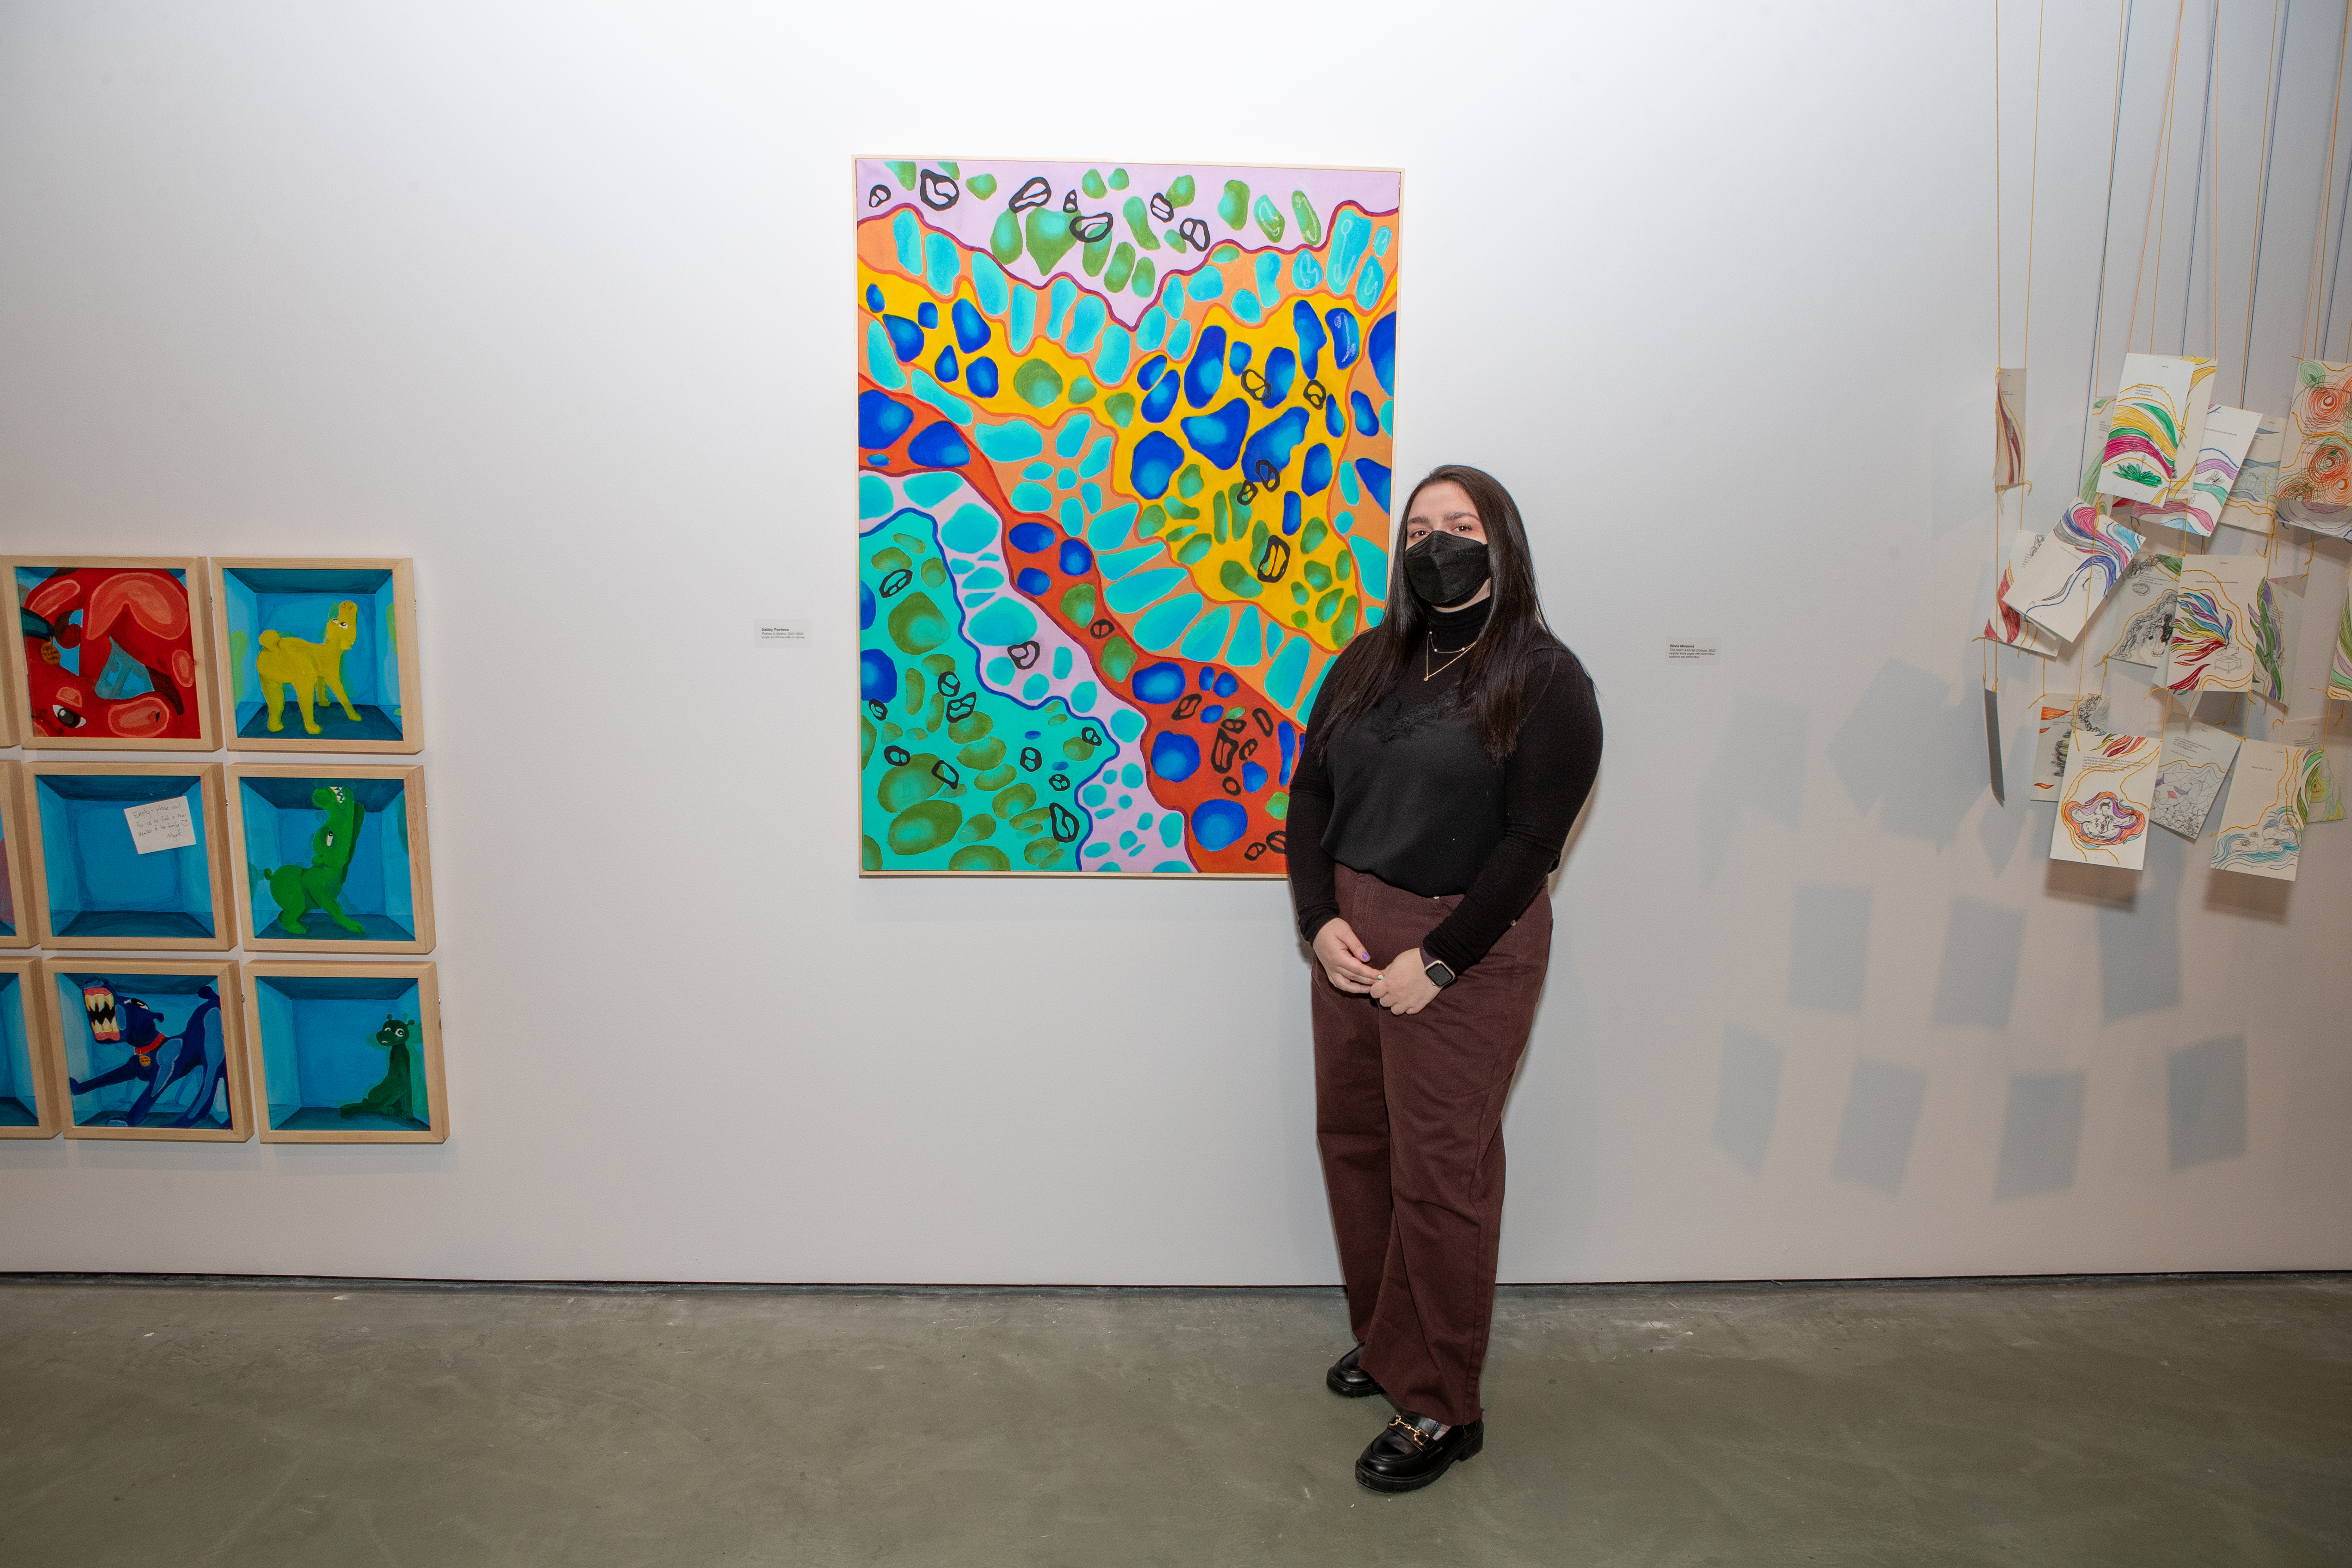 A student in front of an abstract brightly coloured painting